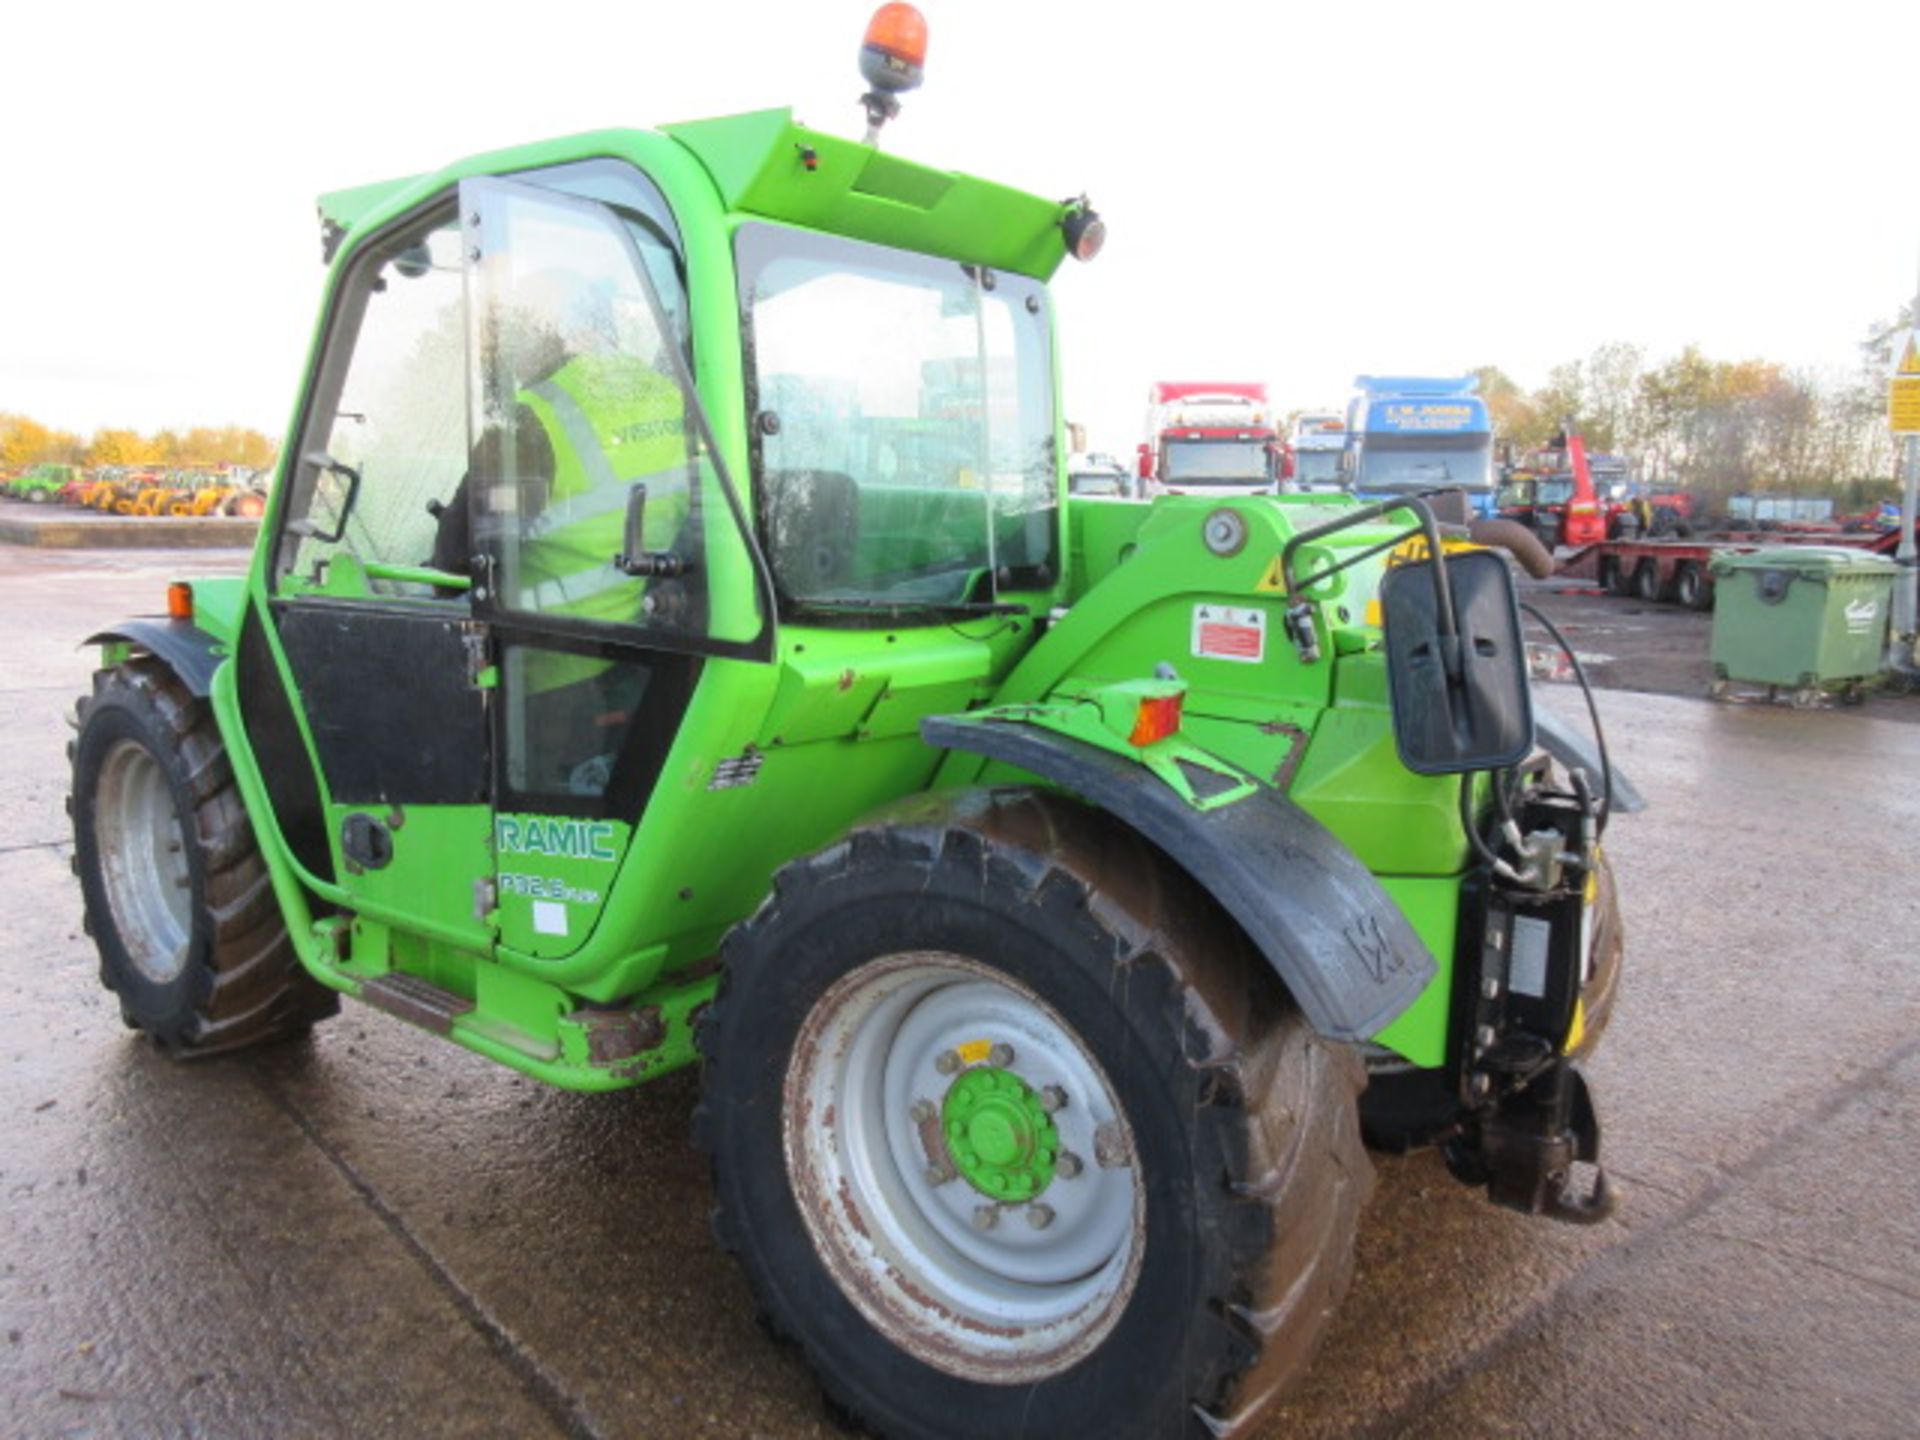 2010 Merlo Panoramic P32.6 Plus Telehandler. Pallet Forks & Pick Up Hitch. 7400 hrs - Image 7 of 11